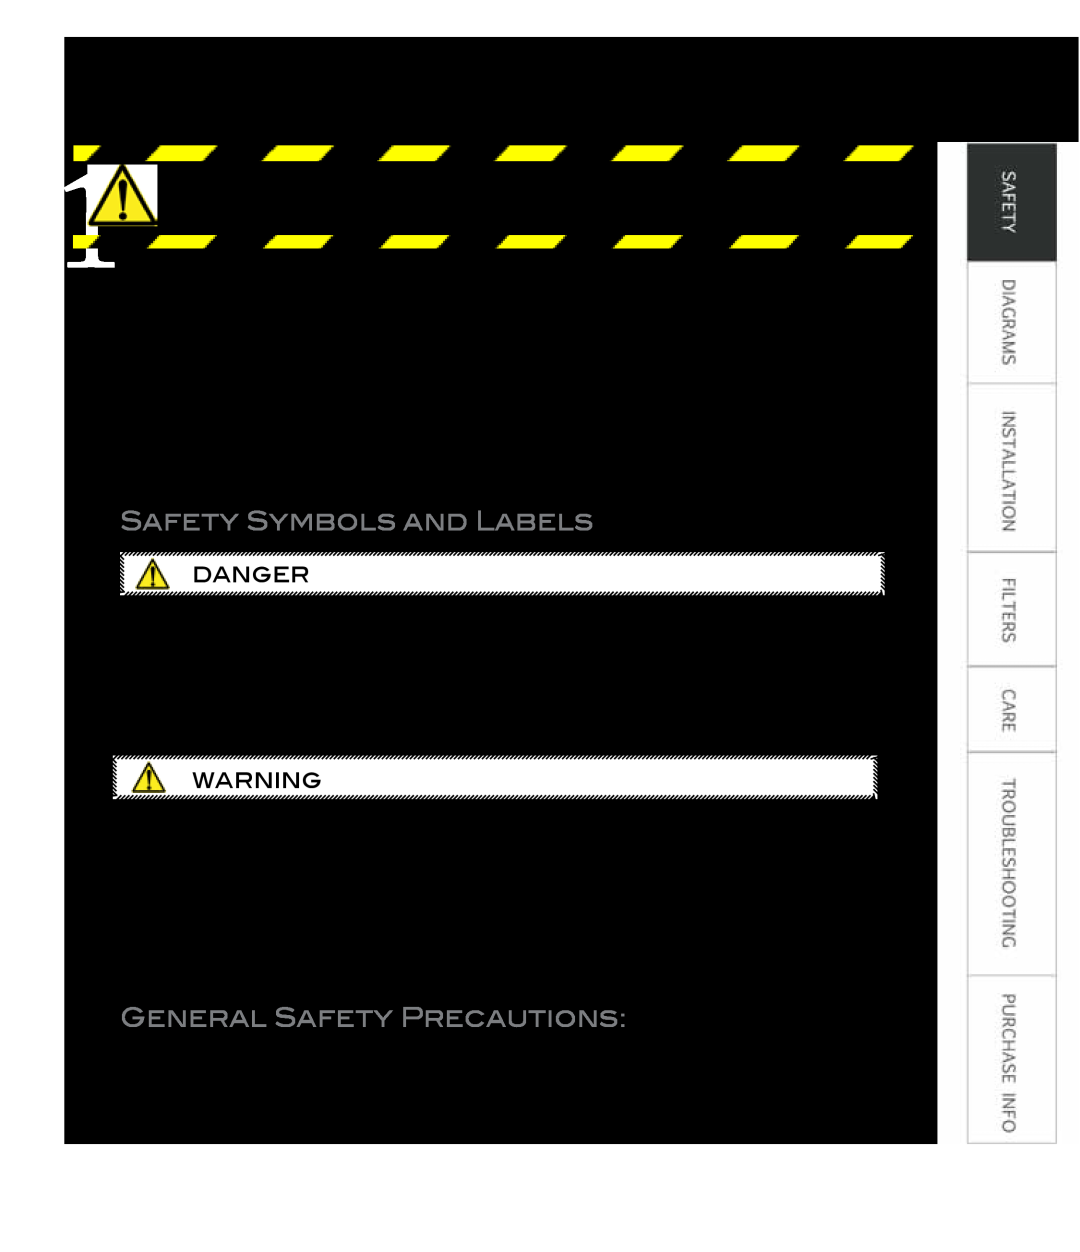 Proline PLFW543, PLFI750, PLFW812 Important Safety Notice, Safety Symbols And Labels, General Safety Precautions, Danger 